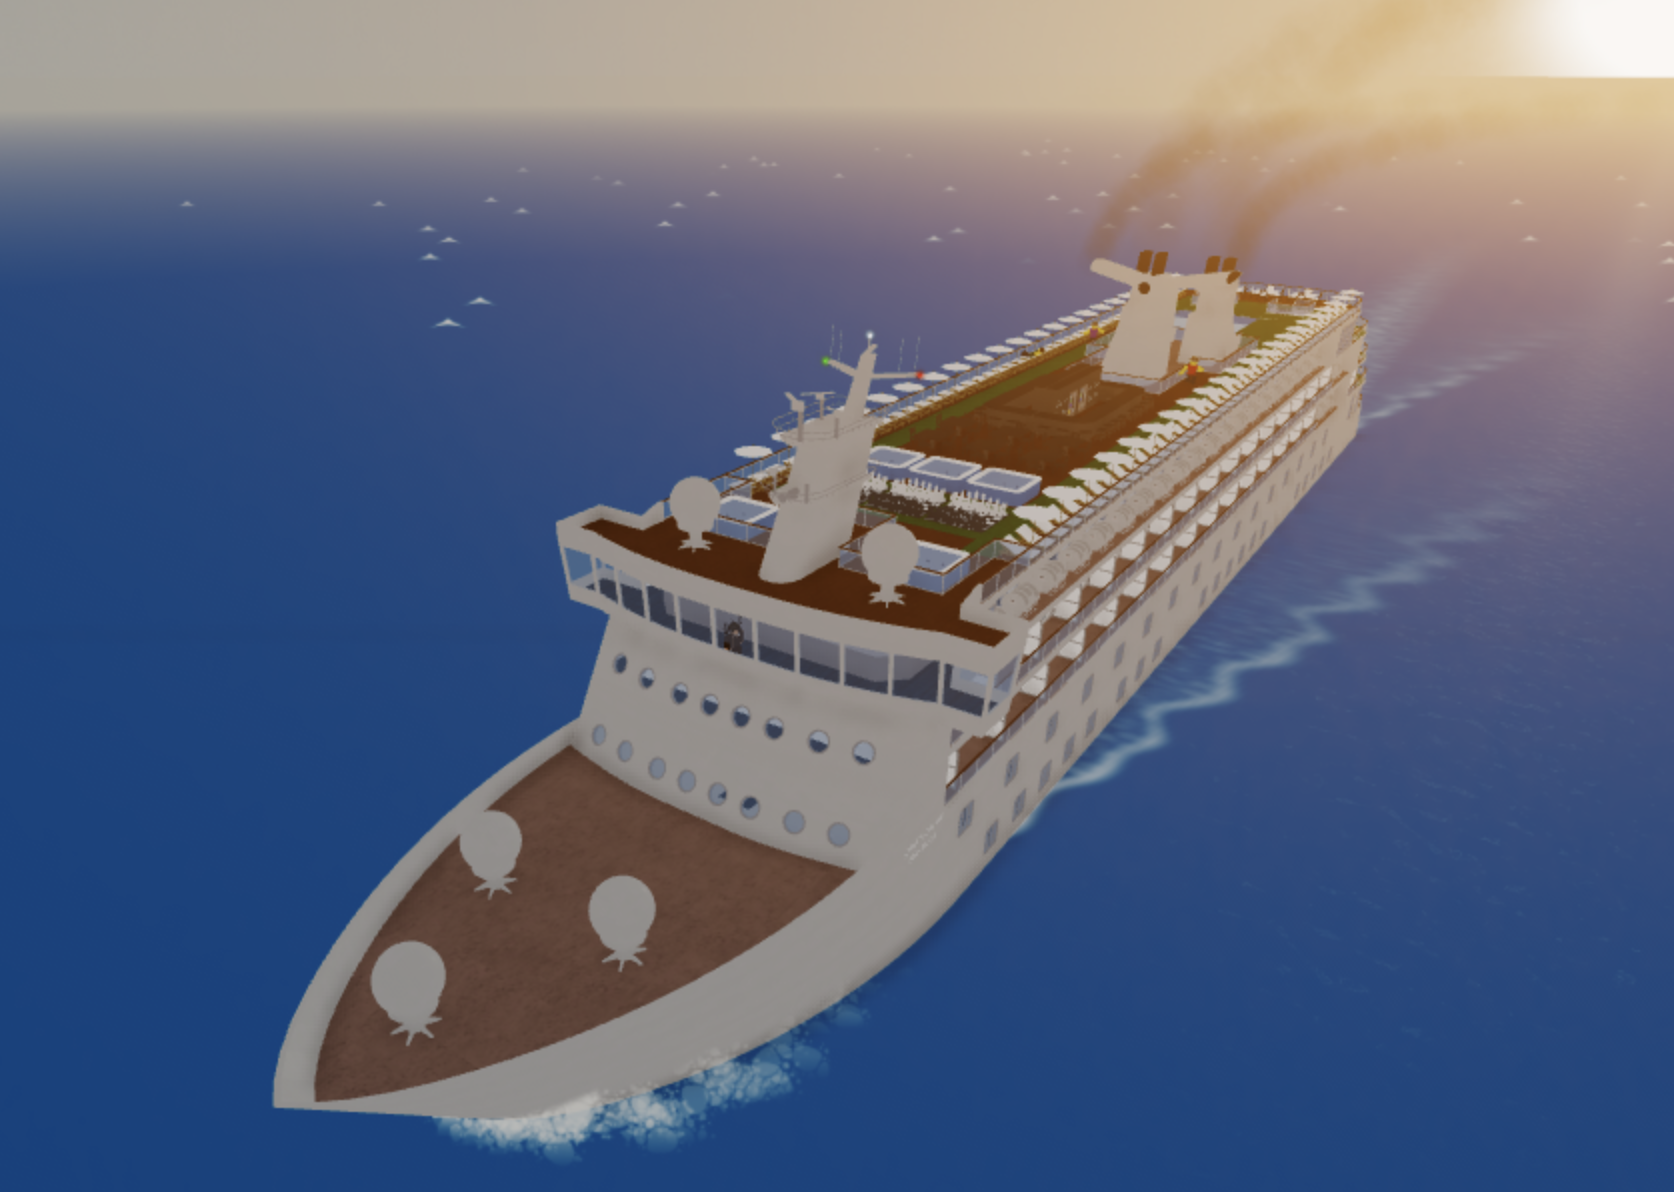 Xwlpac Ml5dtmm - roblox cruise ship tycoon osprey class